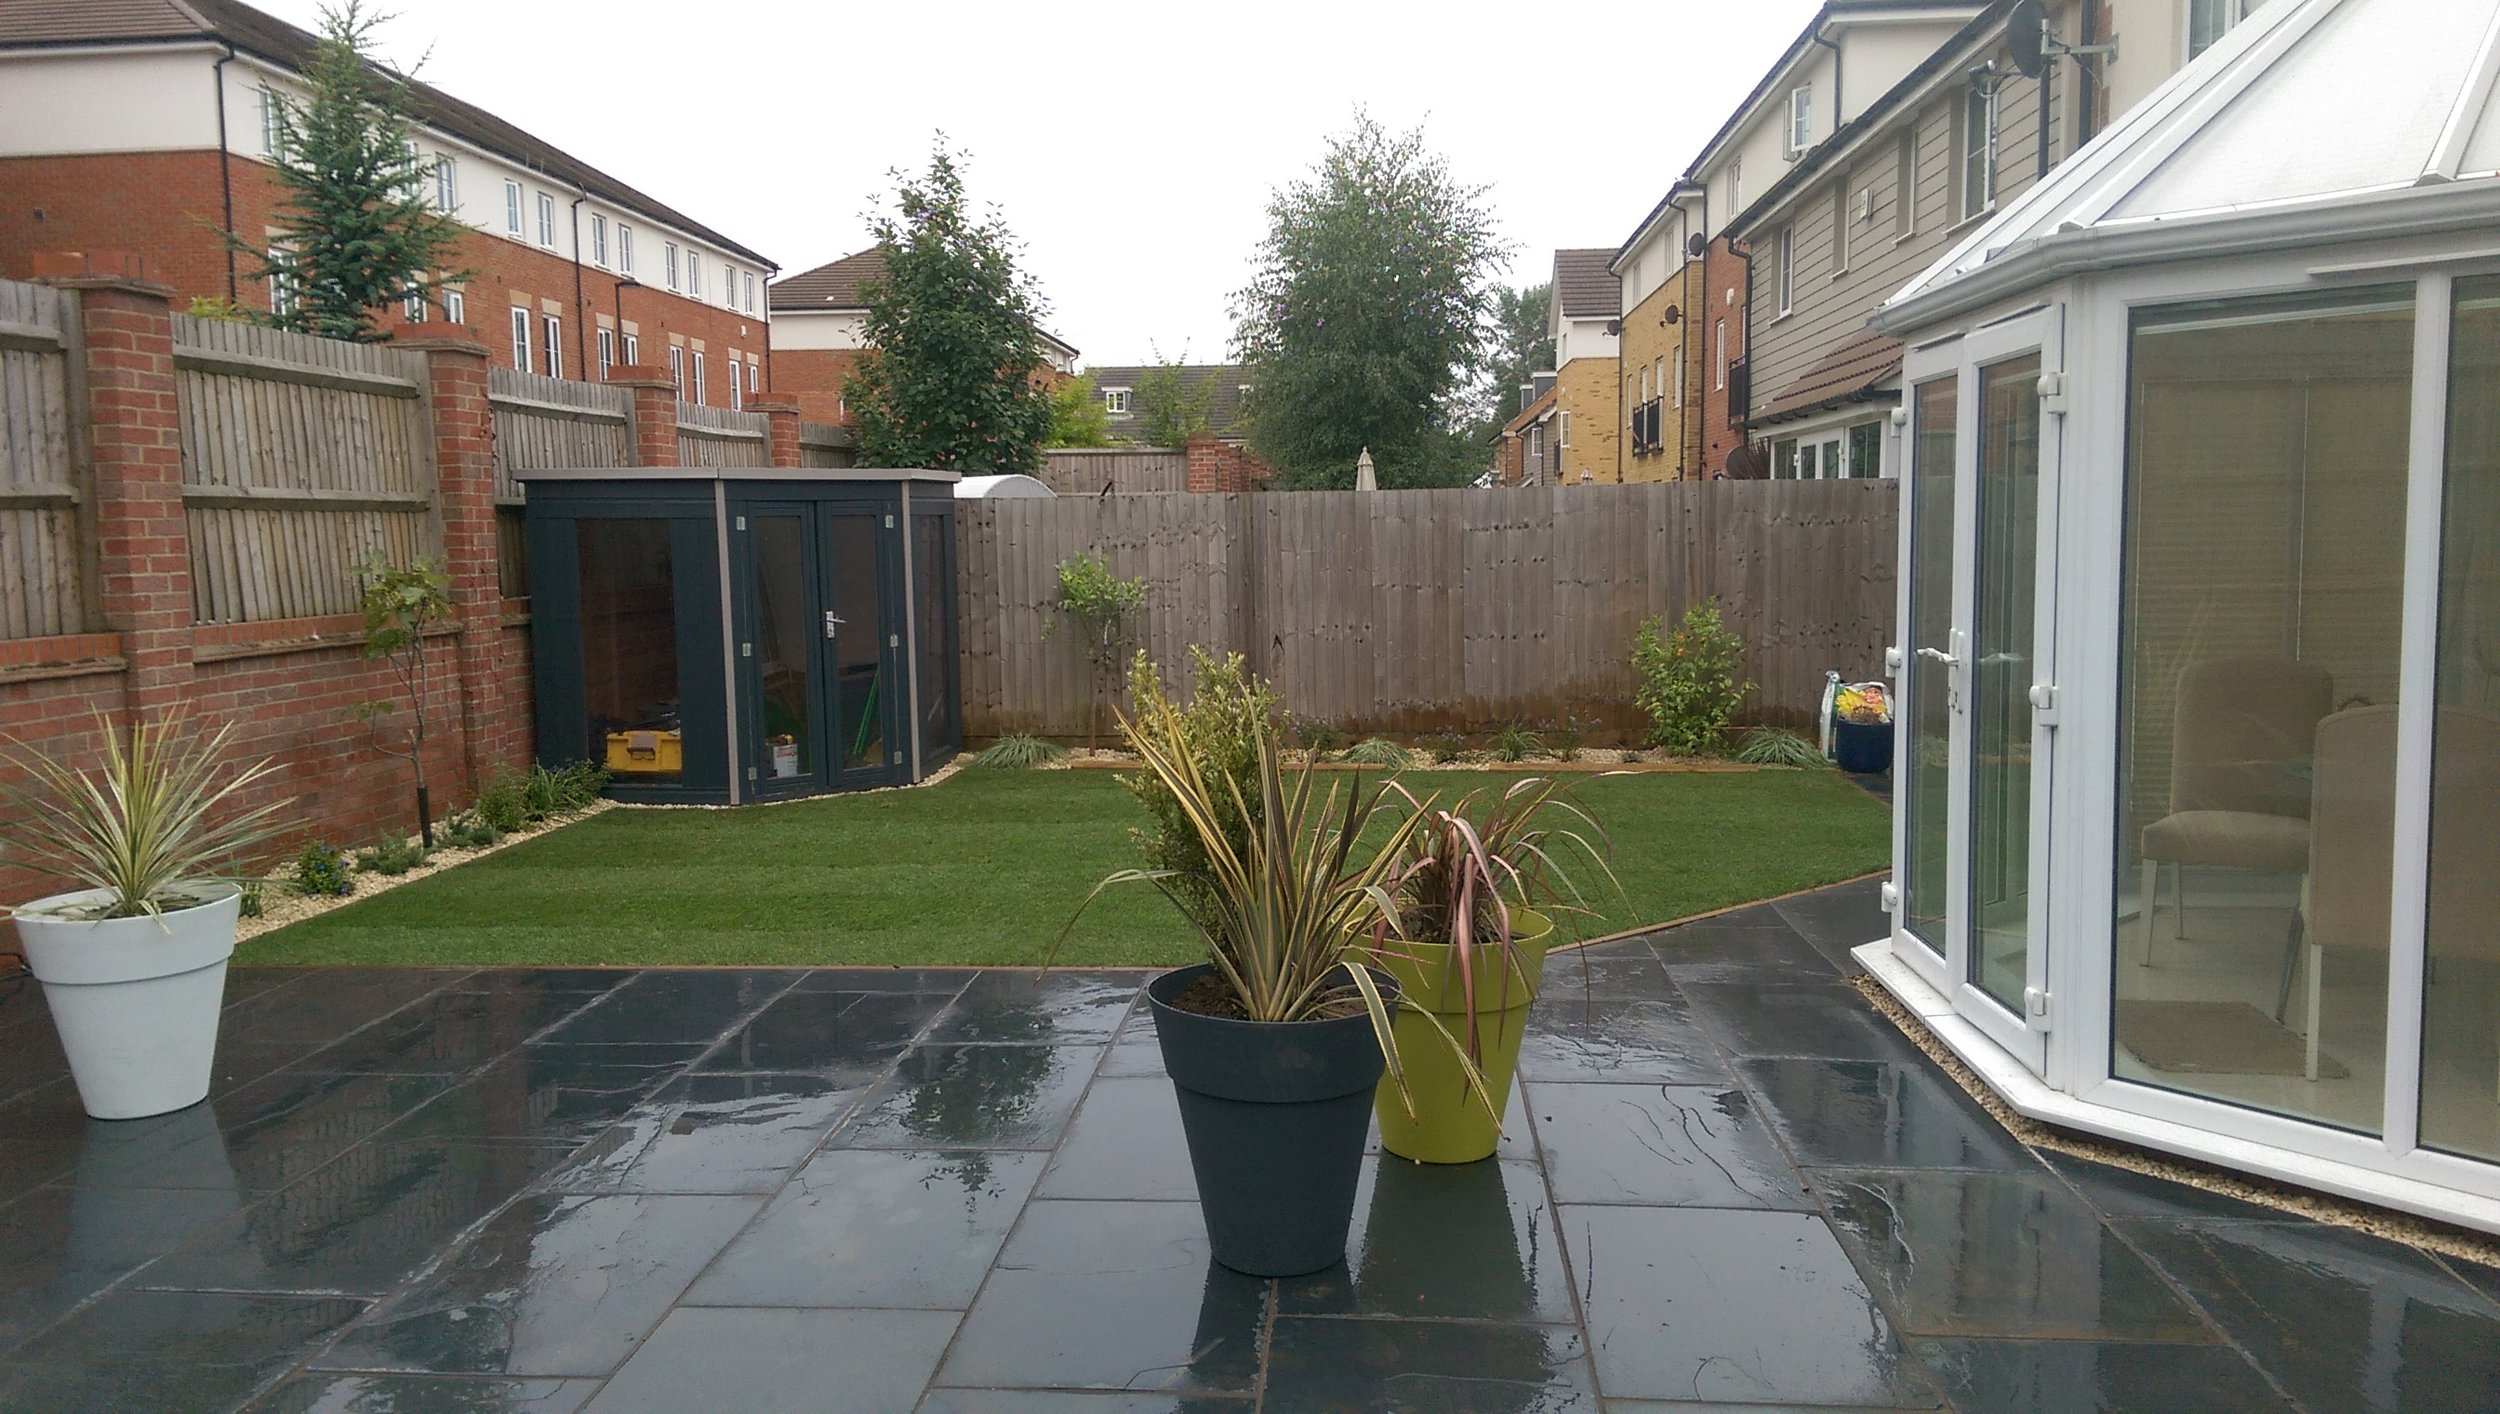 N E Gardencare Landscaping and Gardening in South East London Club Card 9.jpg